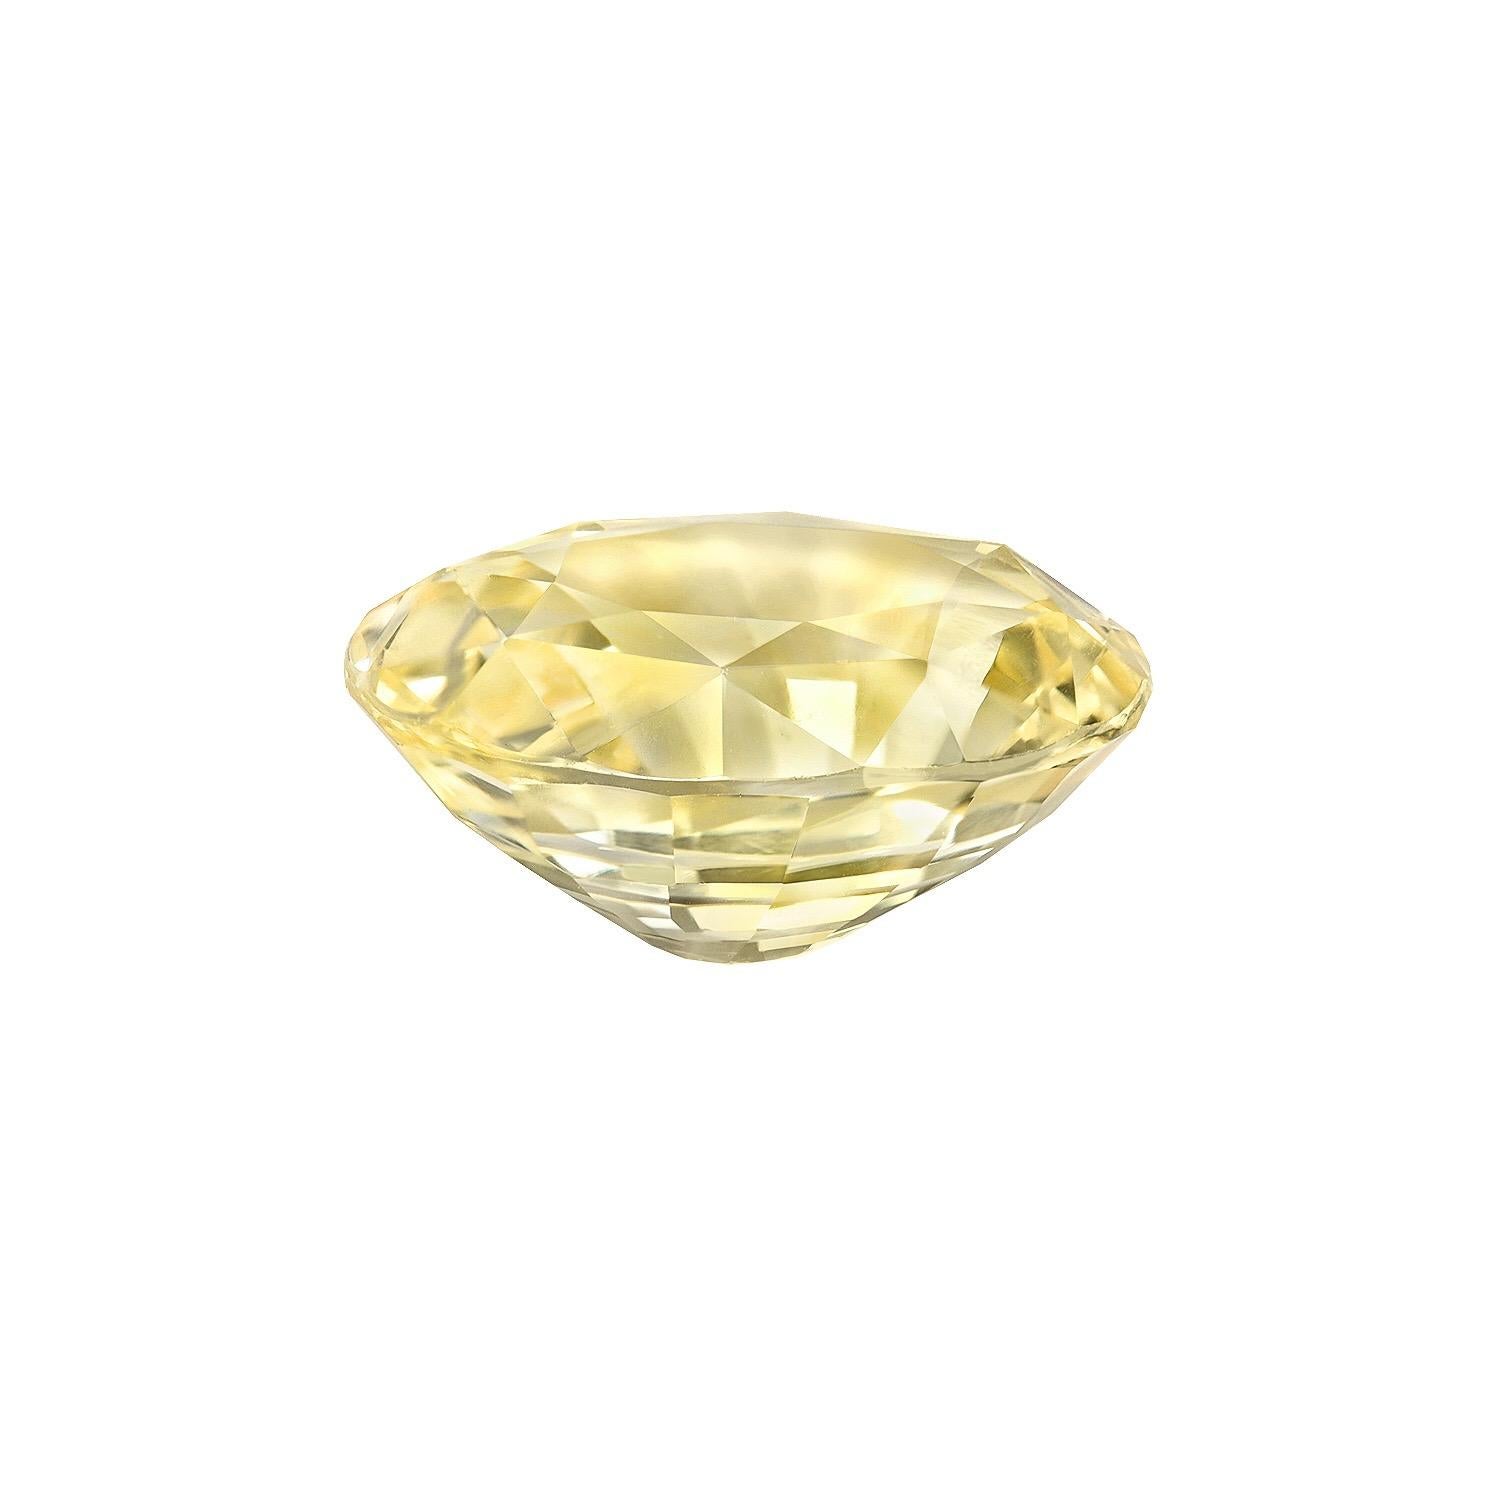 Natural, unheated 5.56 carat Ceylon Yellow Sapphire oval, offered loose to the world's most avid gem collectors.
AGTA (American Gem Trade Association) gem certificate is attached to the images for your reference.
This superb gem would make an